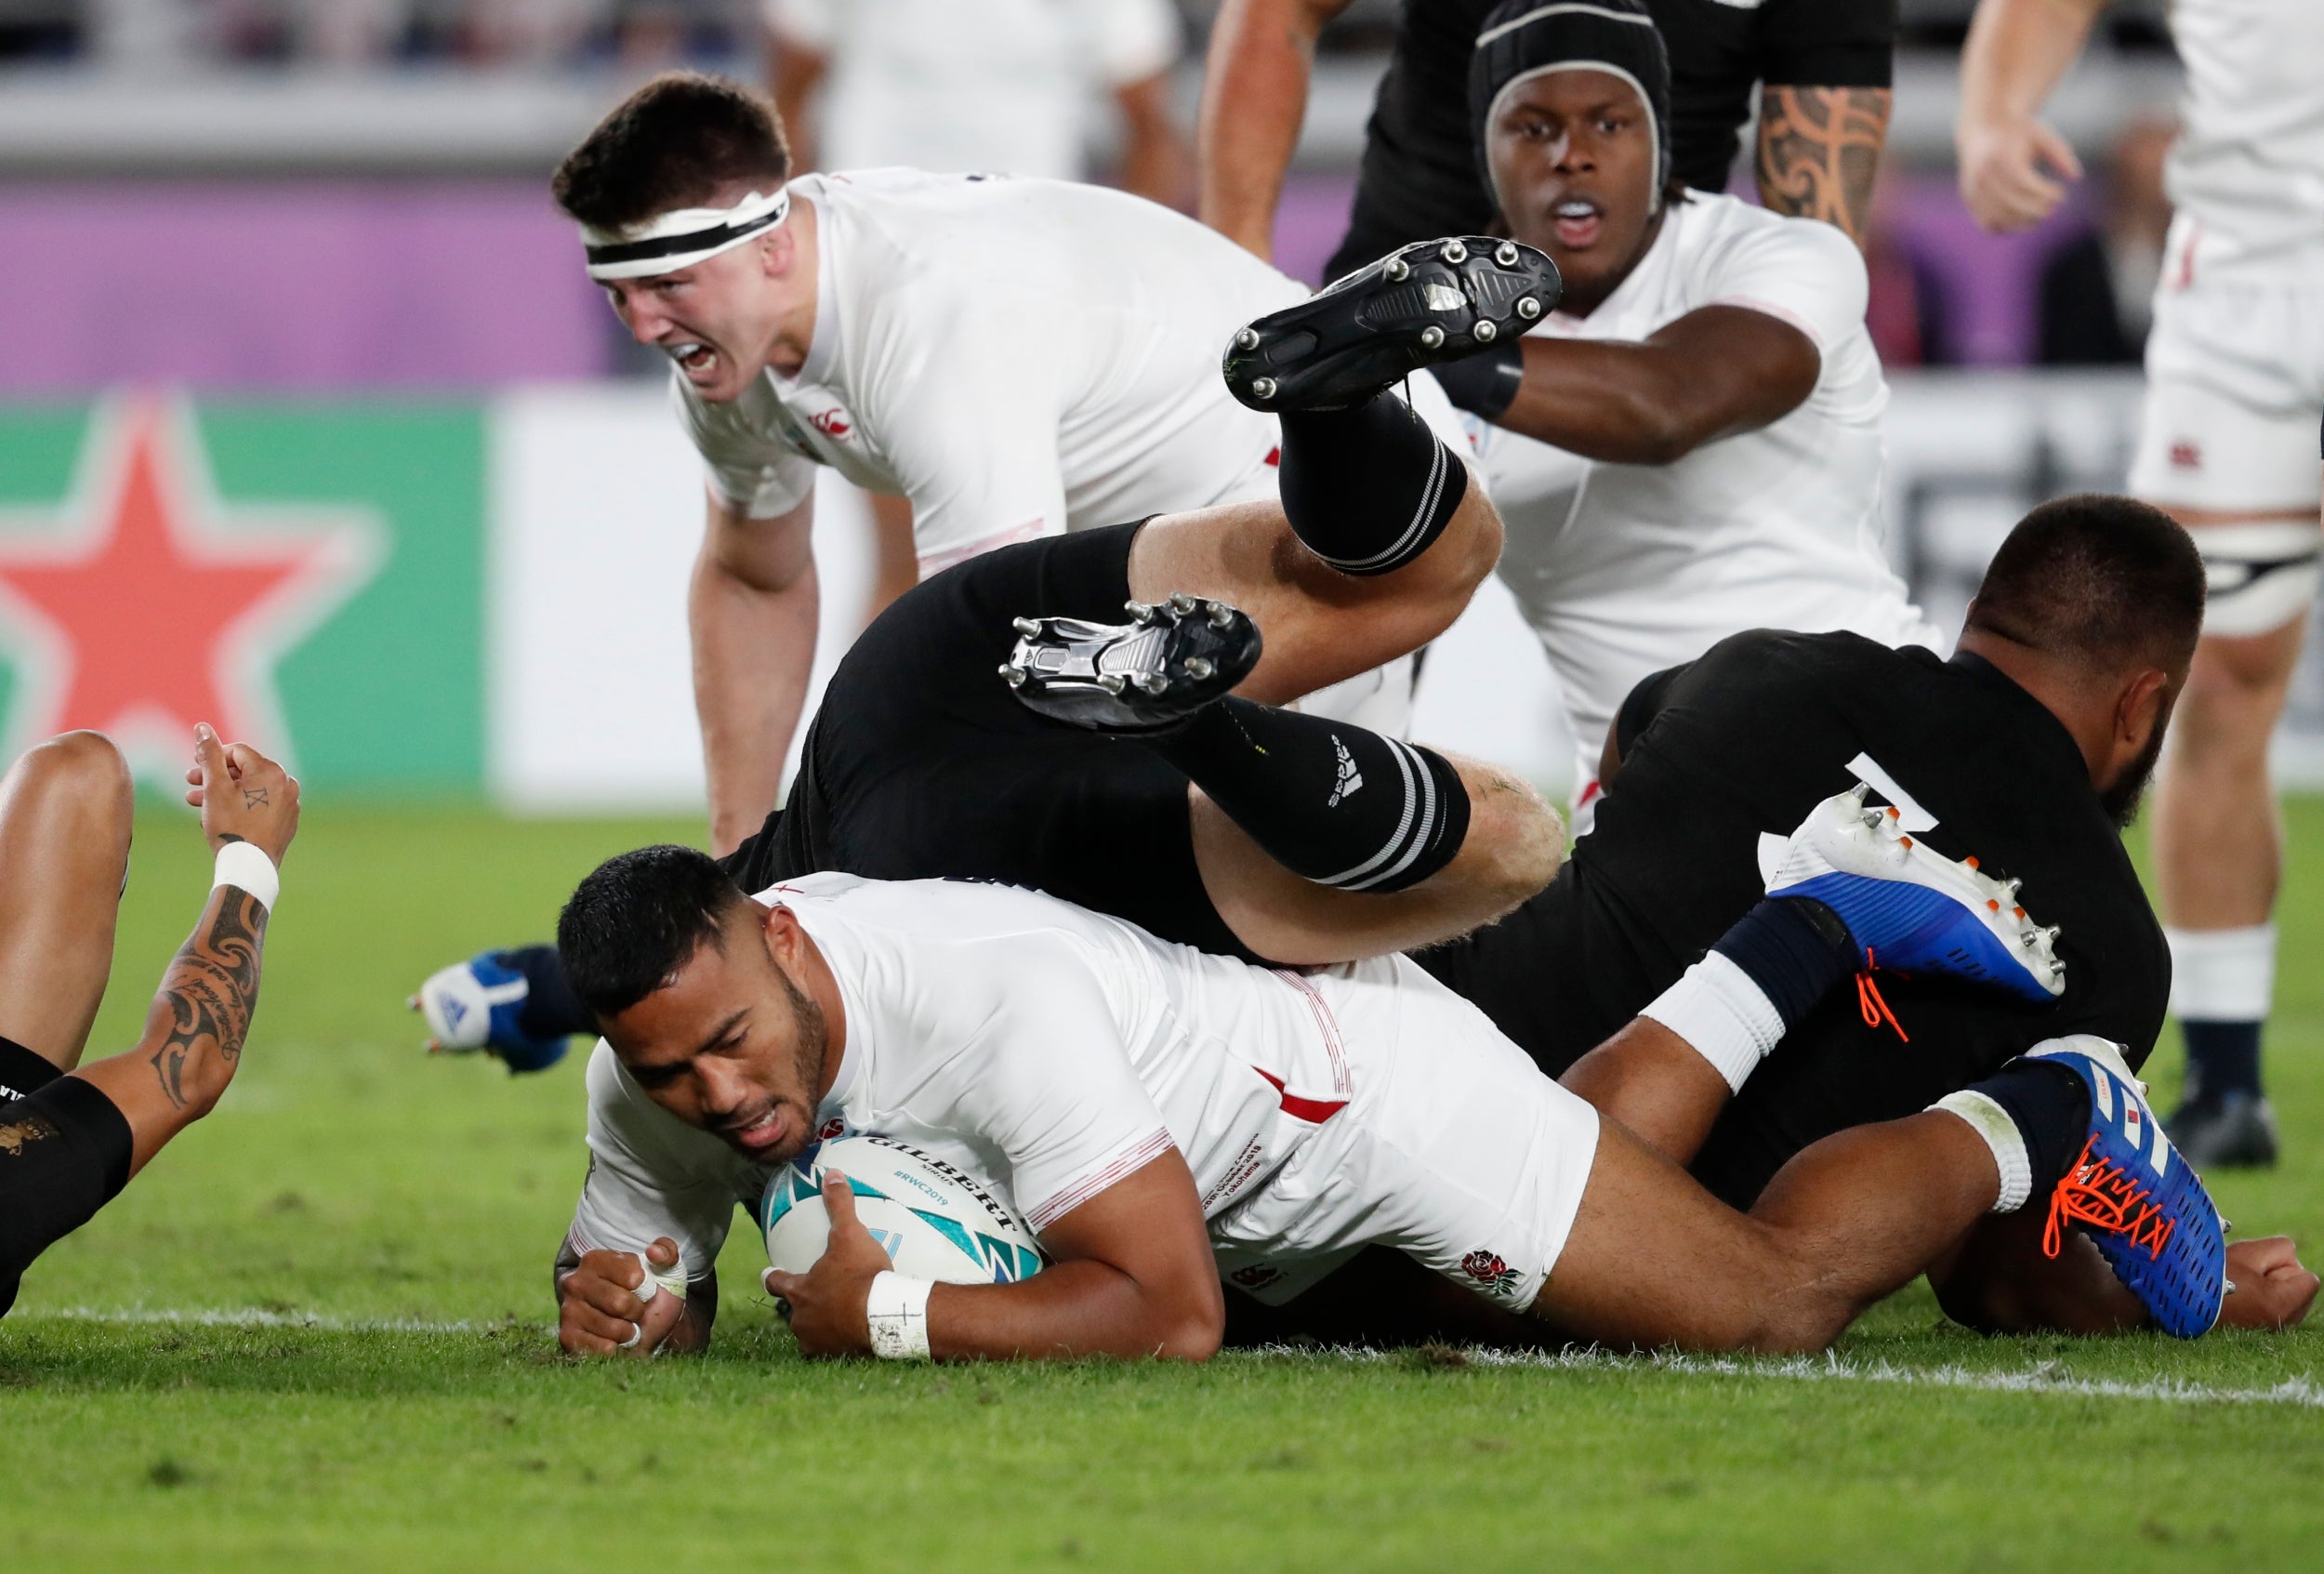 England made a fast start against the All Blacks